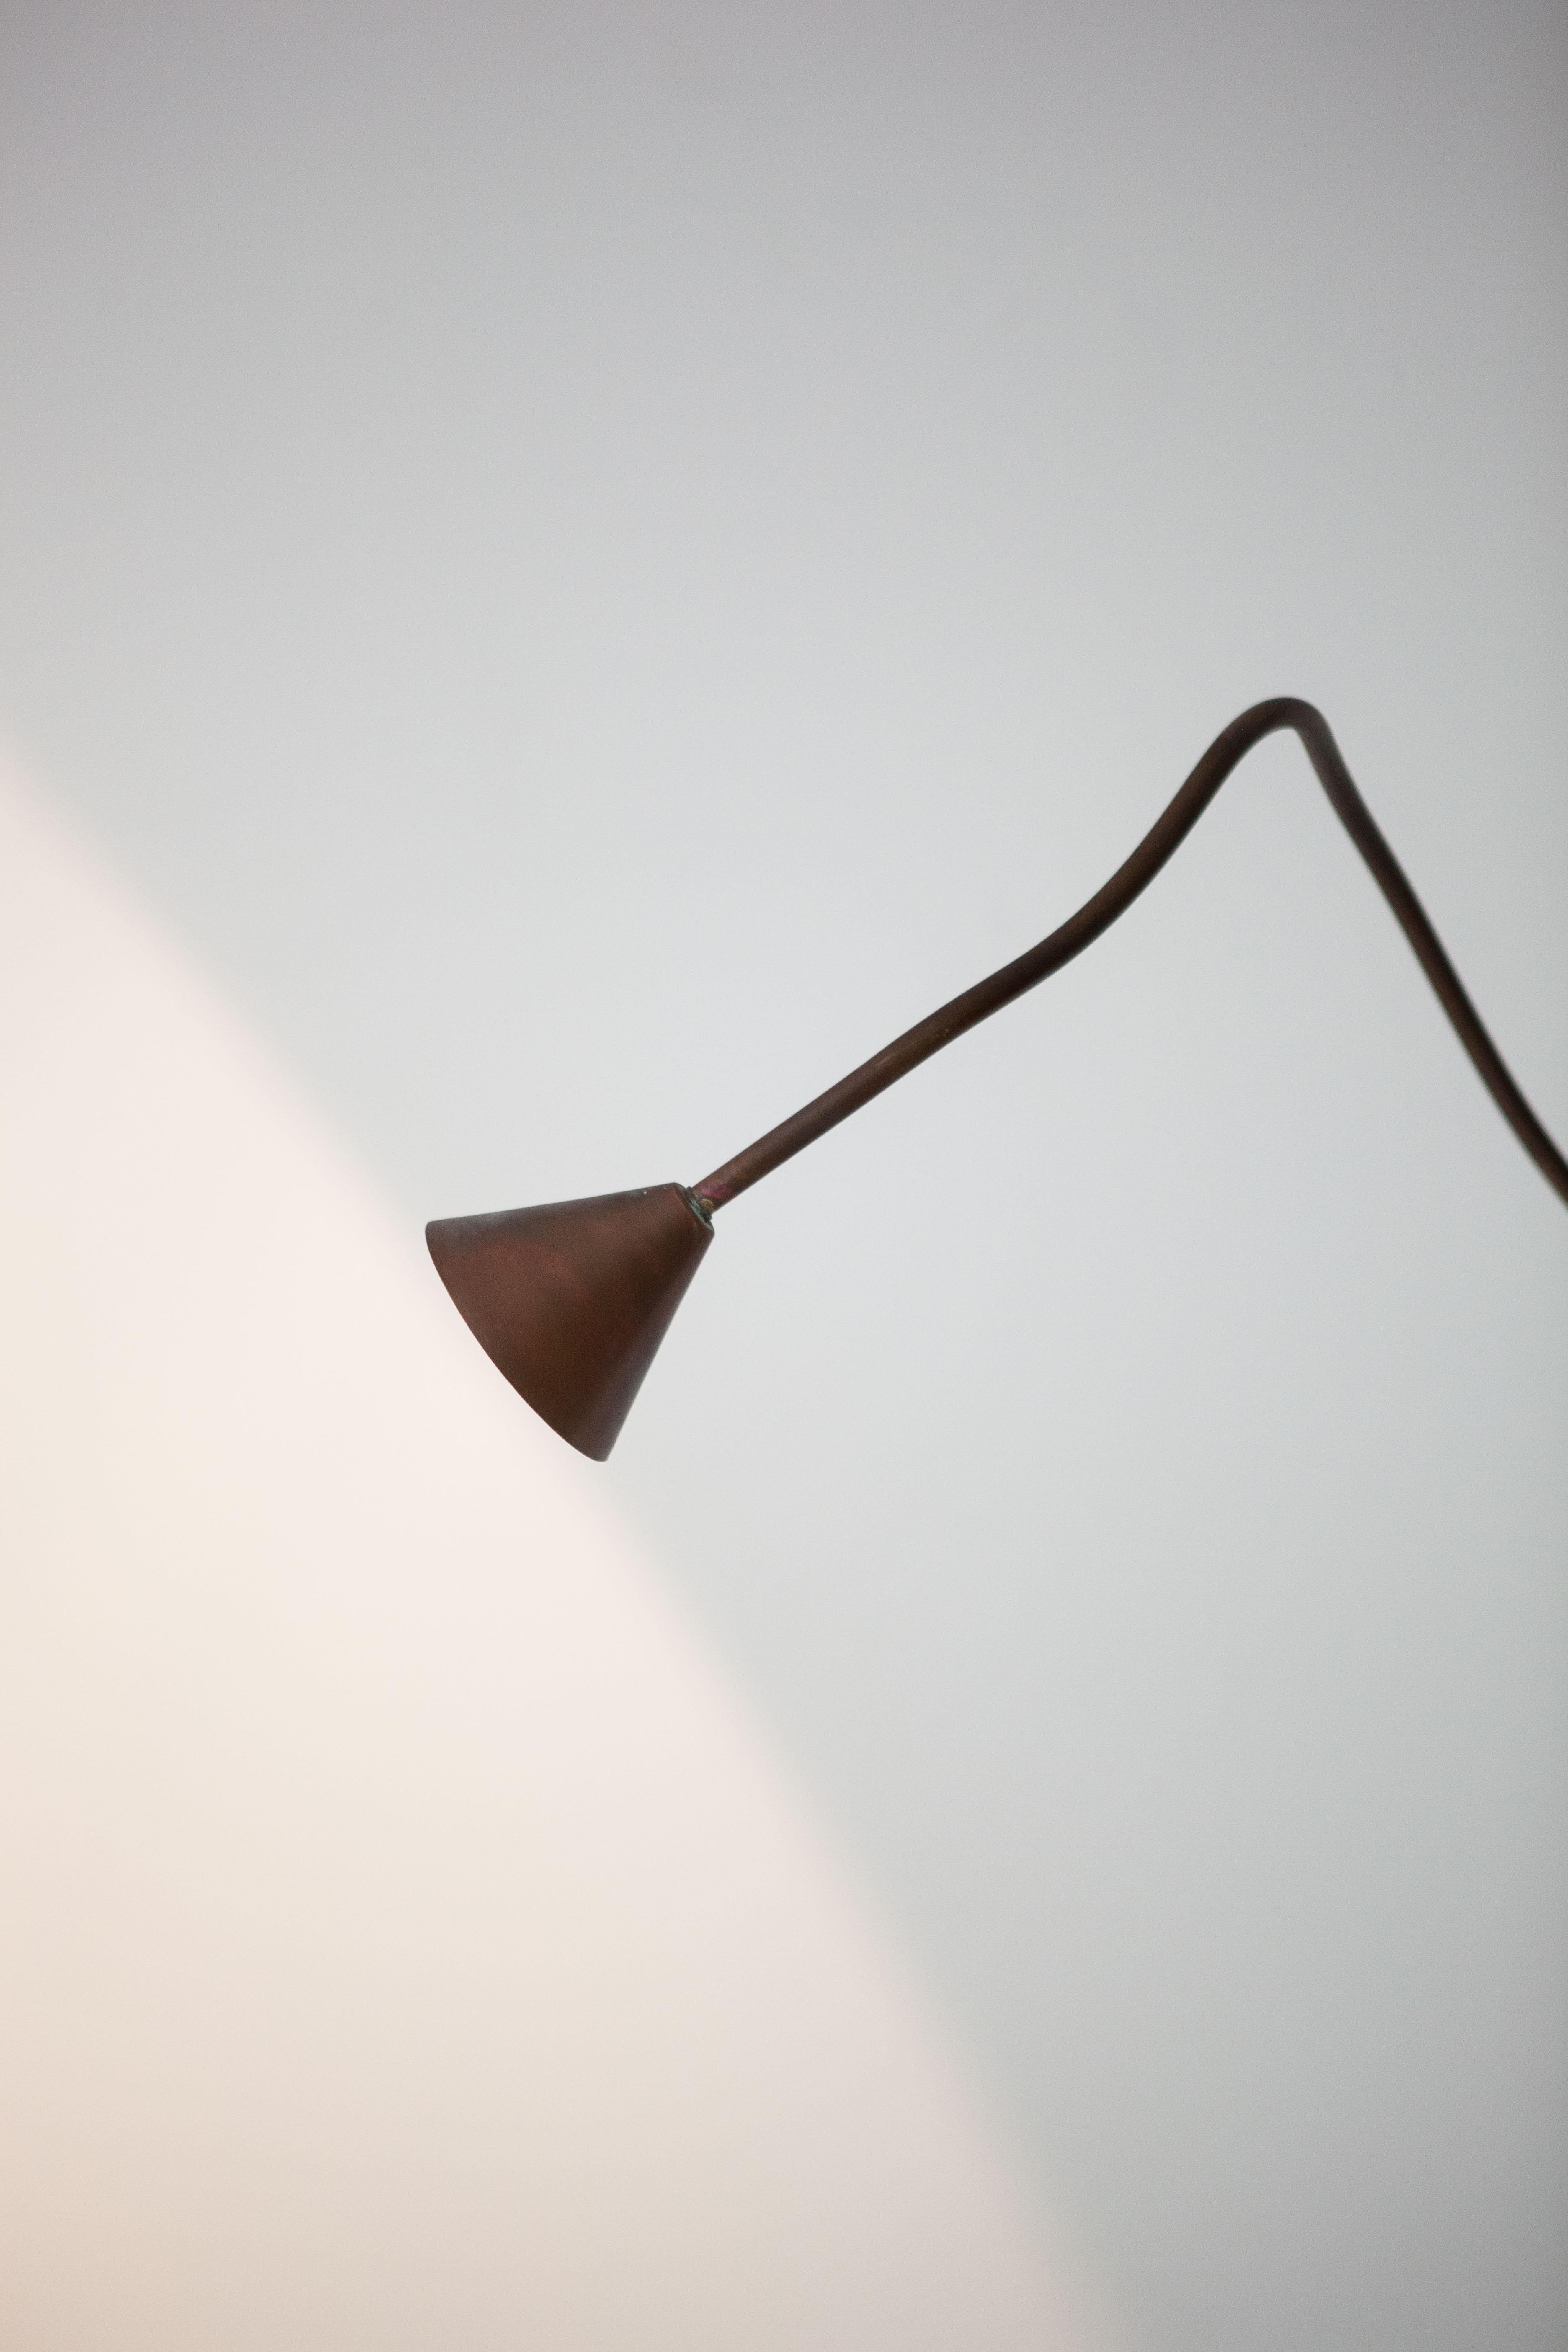 With the Papiro floor lamp, Sergio Calatroni united art and design, literally by turning a single line (lines being core to drawing, or design) into a three dimensional sculpture. Papiro comes from papyrus, which is a tall, slim plant sprouting